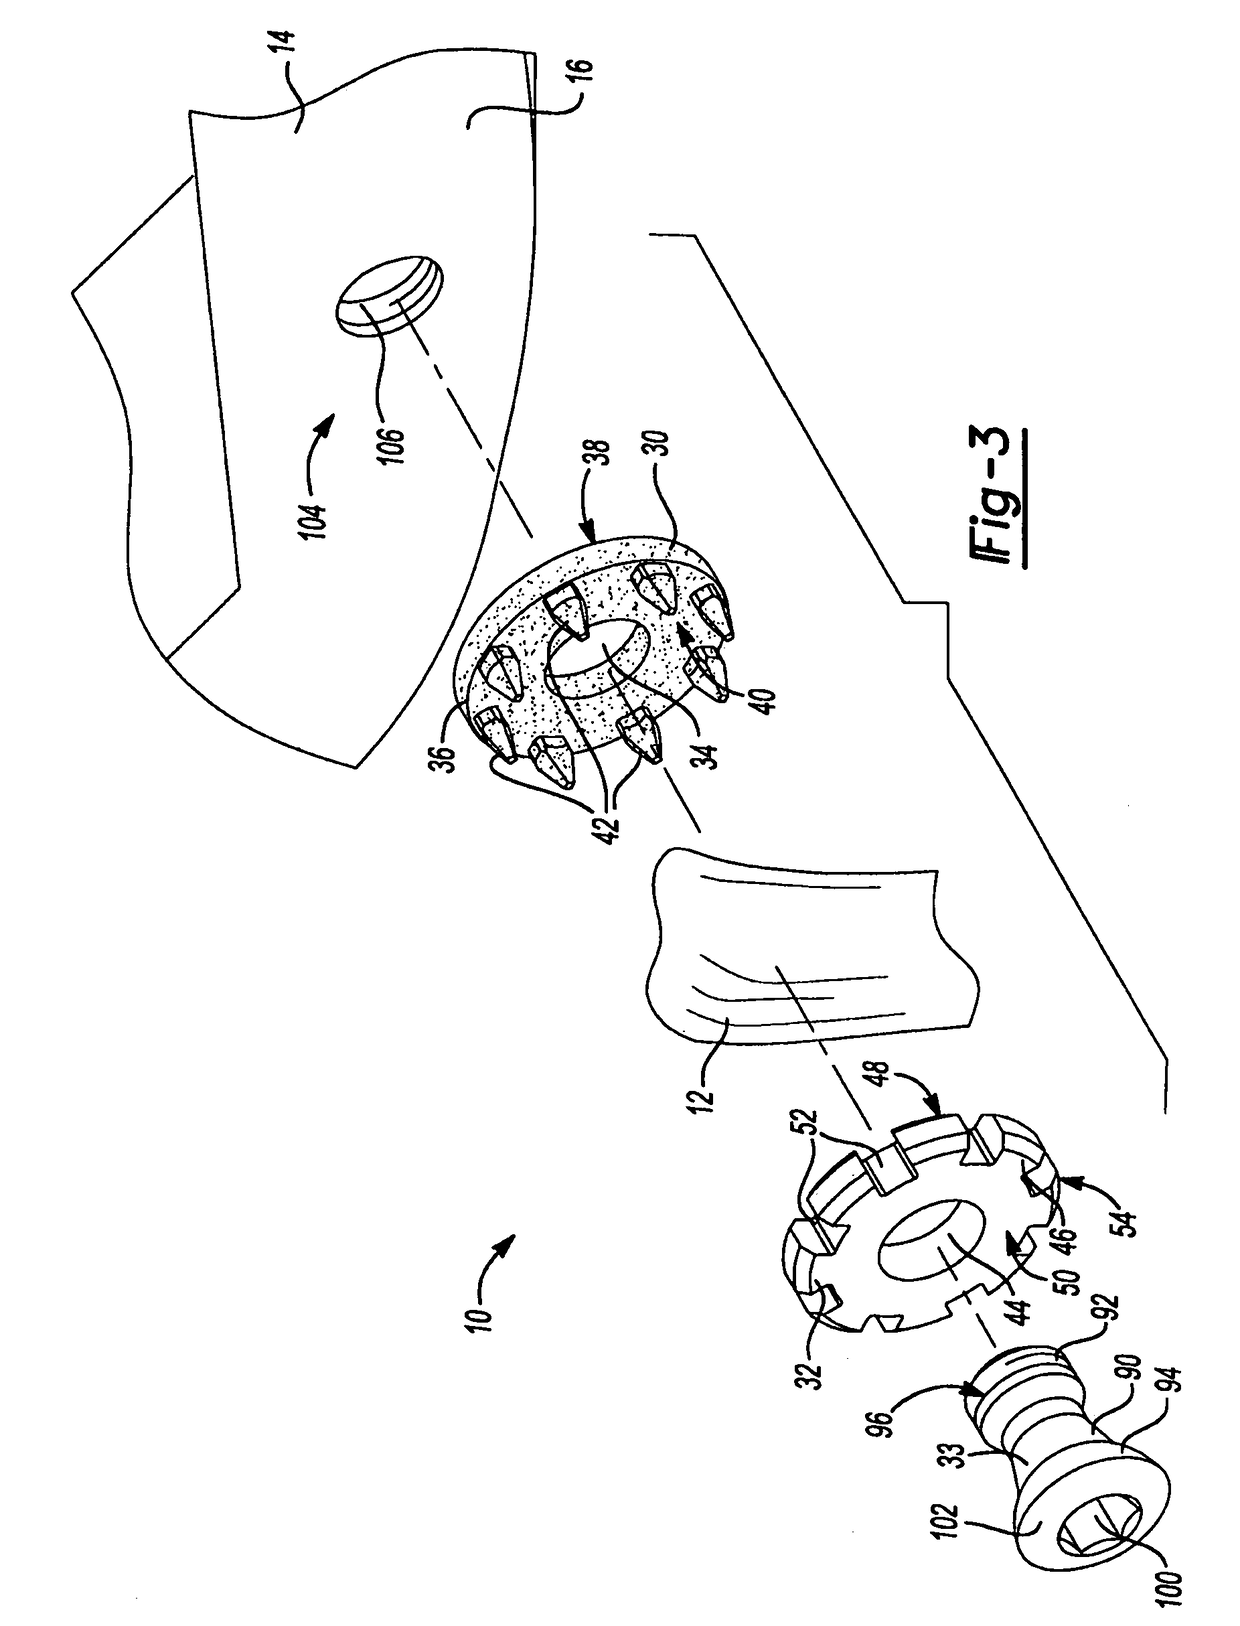 Method and apparatus for attaching soft tissue to an implant